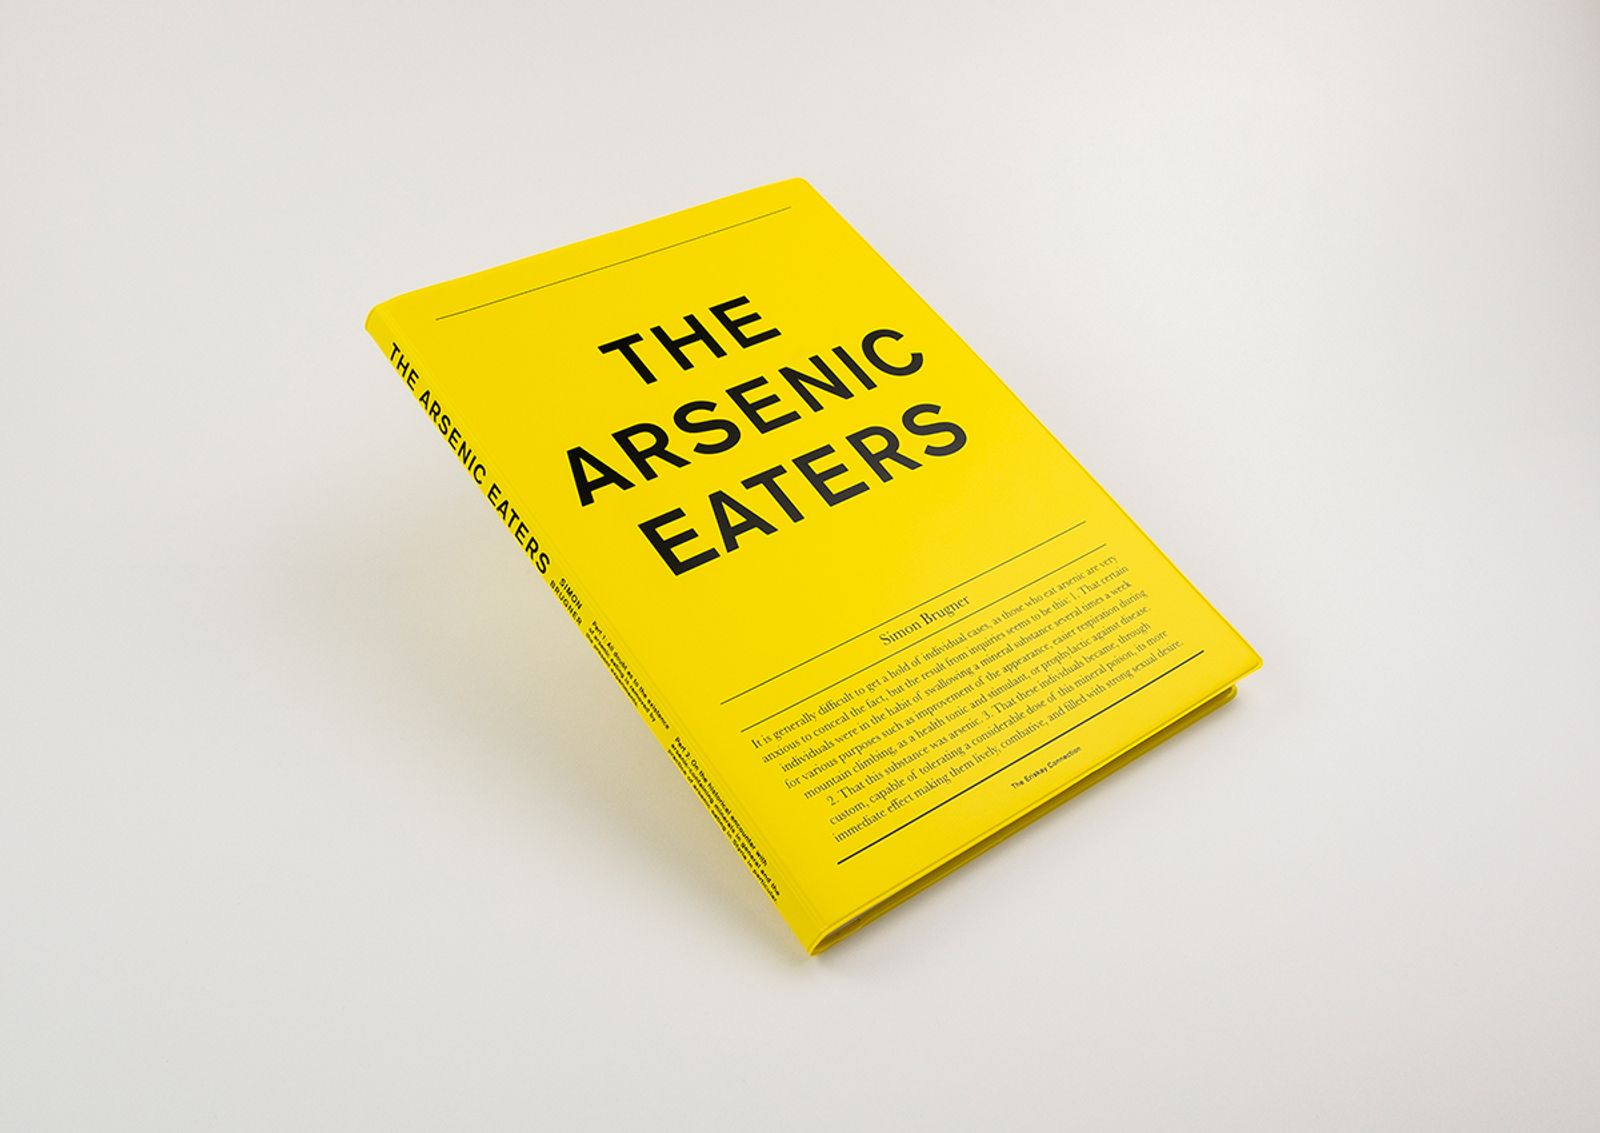 © Simon Brugner - Image from the The Arsenic Eaters photography project